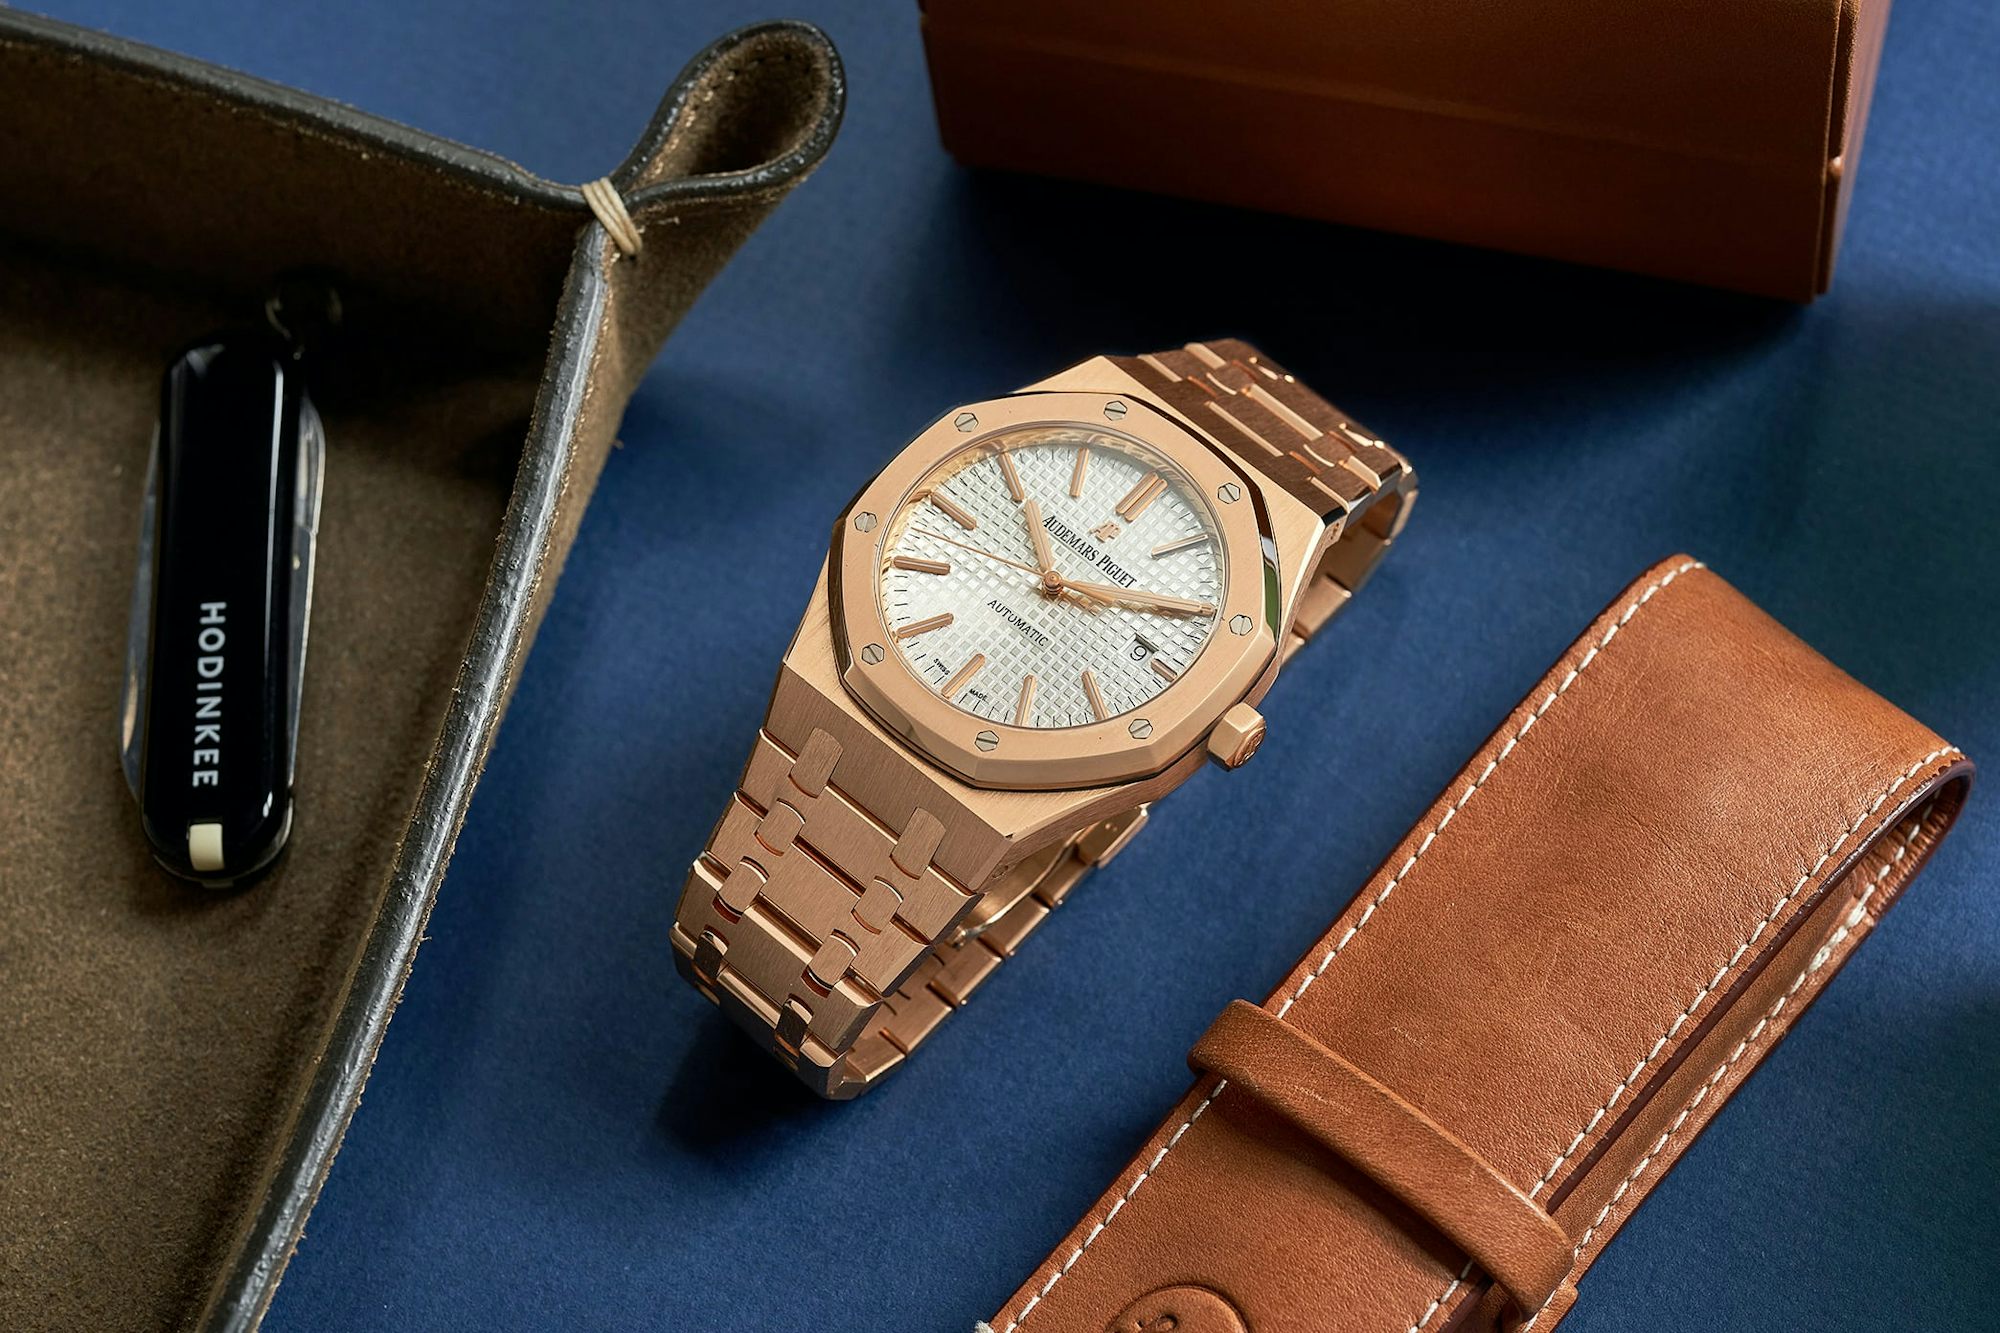 The gold dress of the Audemars Piguet Royal Oak is next to a leather tray